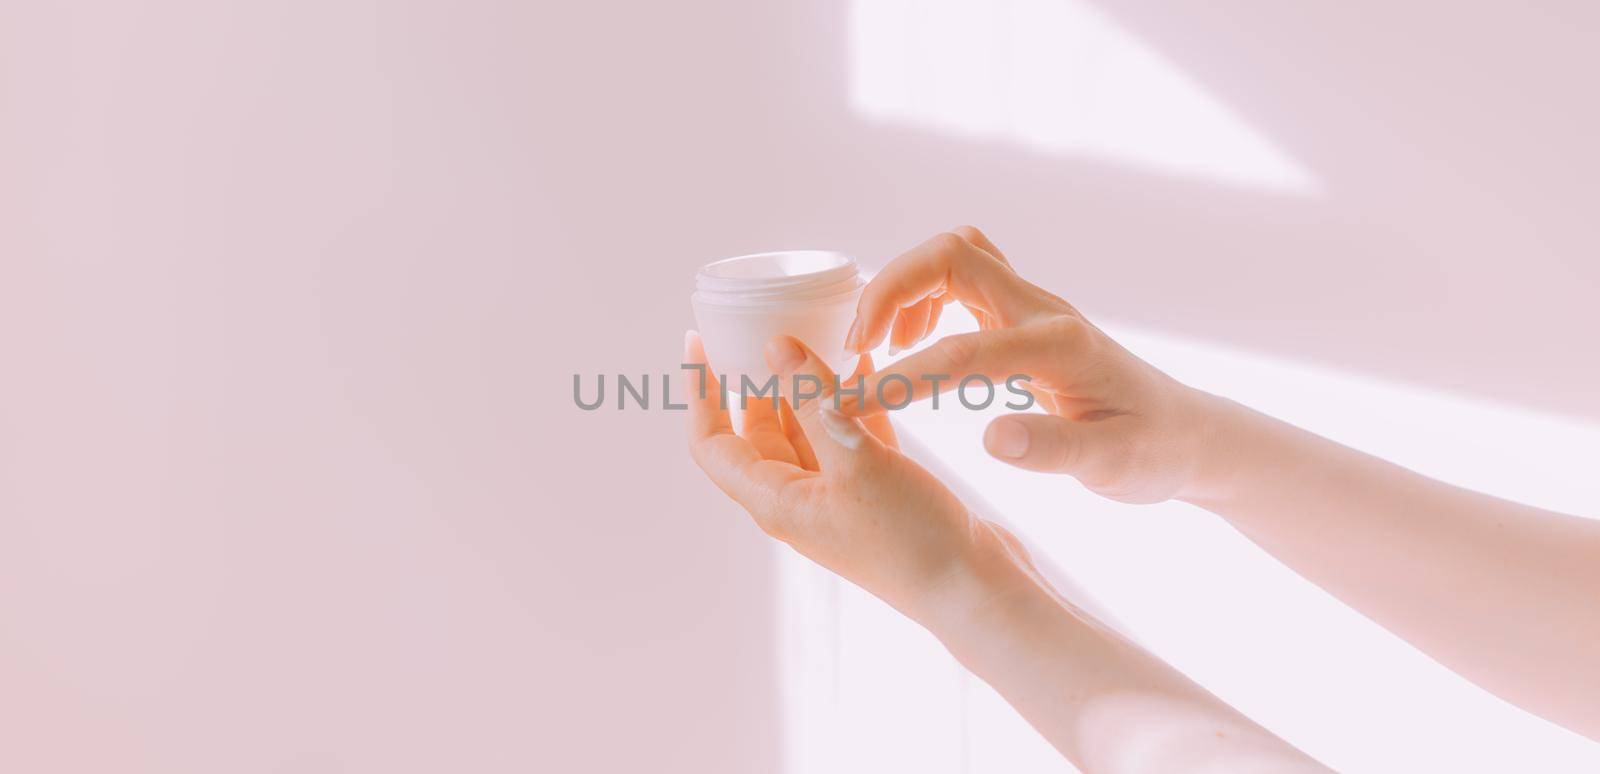 Women's hands hold a cosmetic copy space cream . An article about care cosmetics. Hand cream. Face cream.